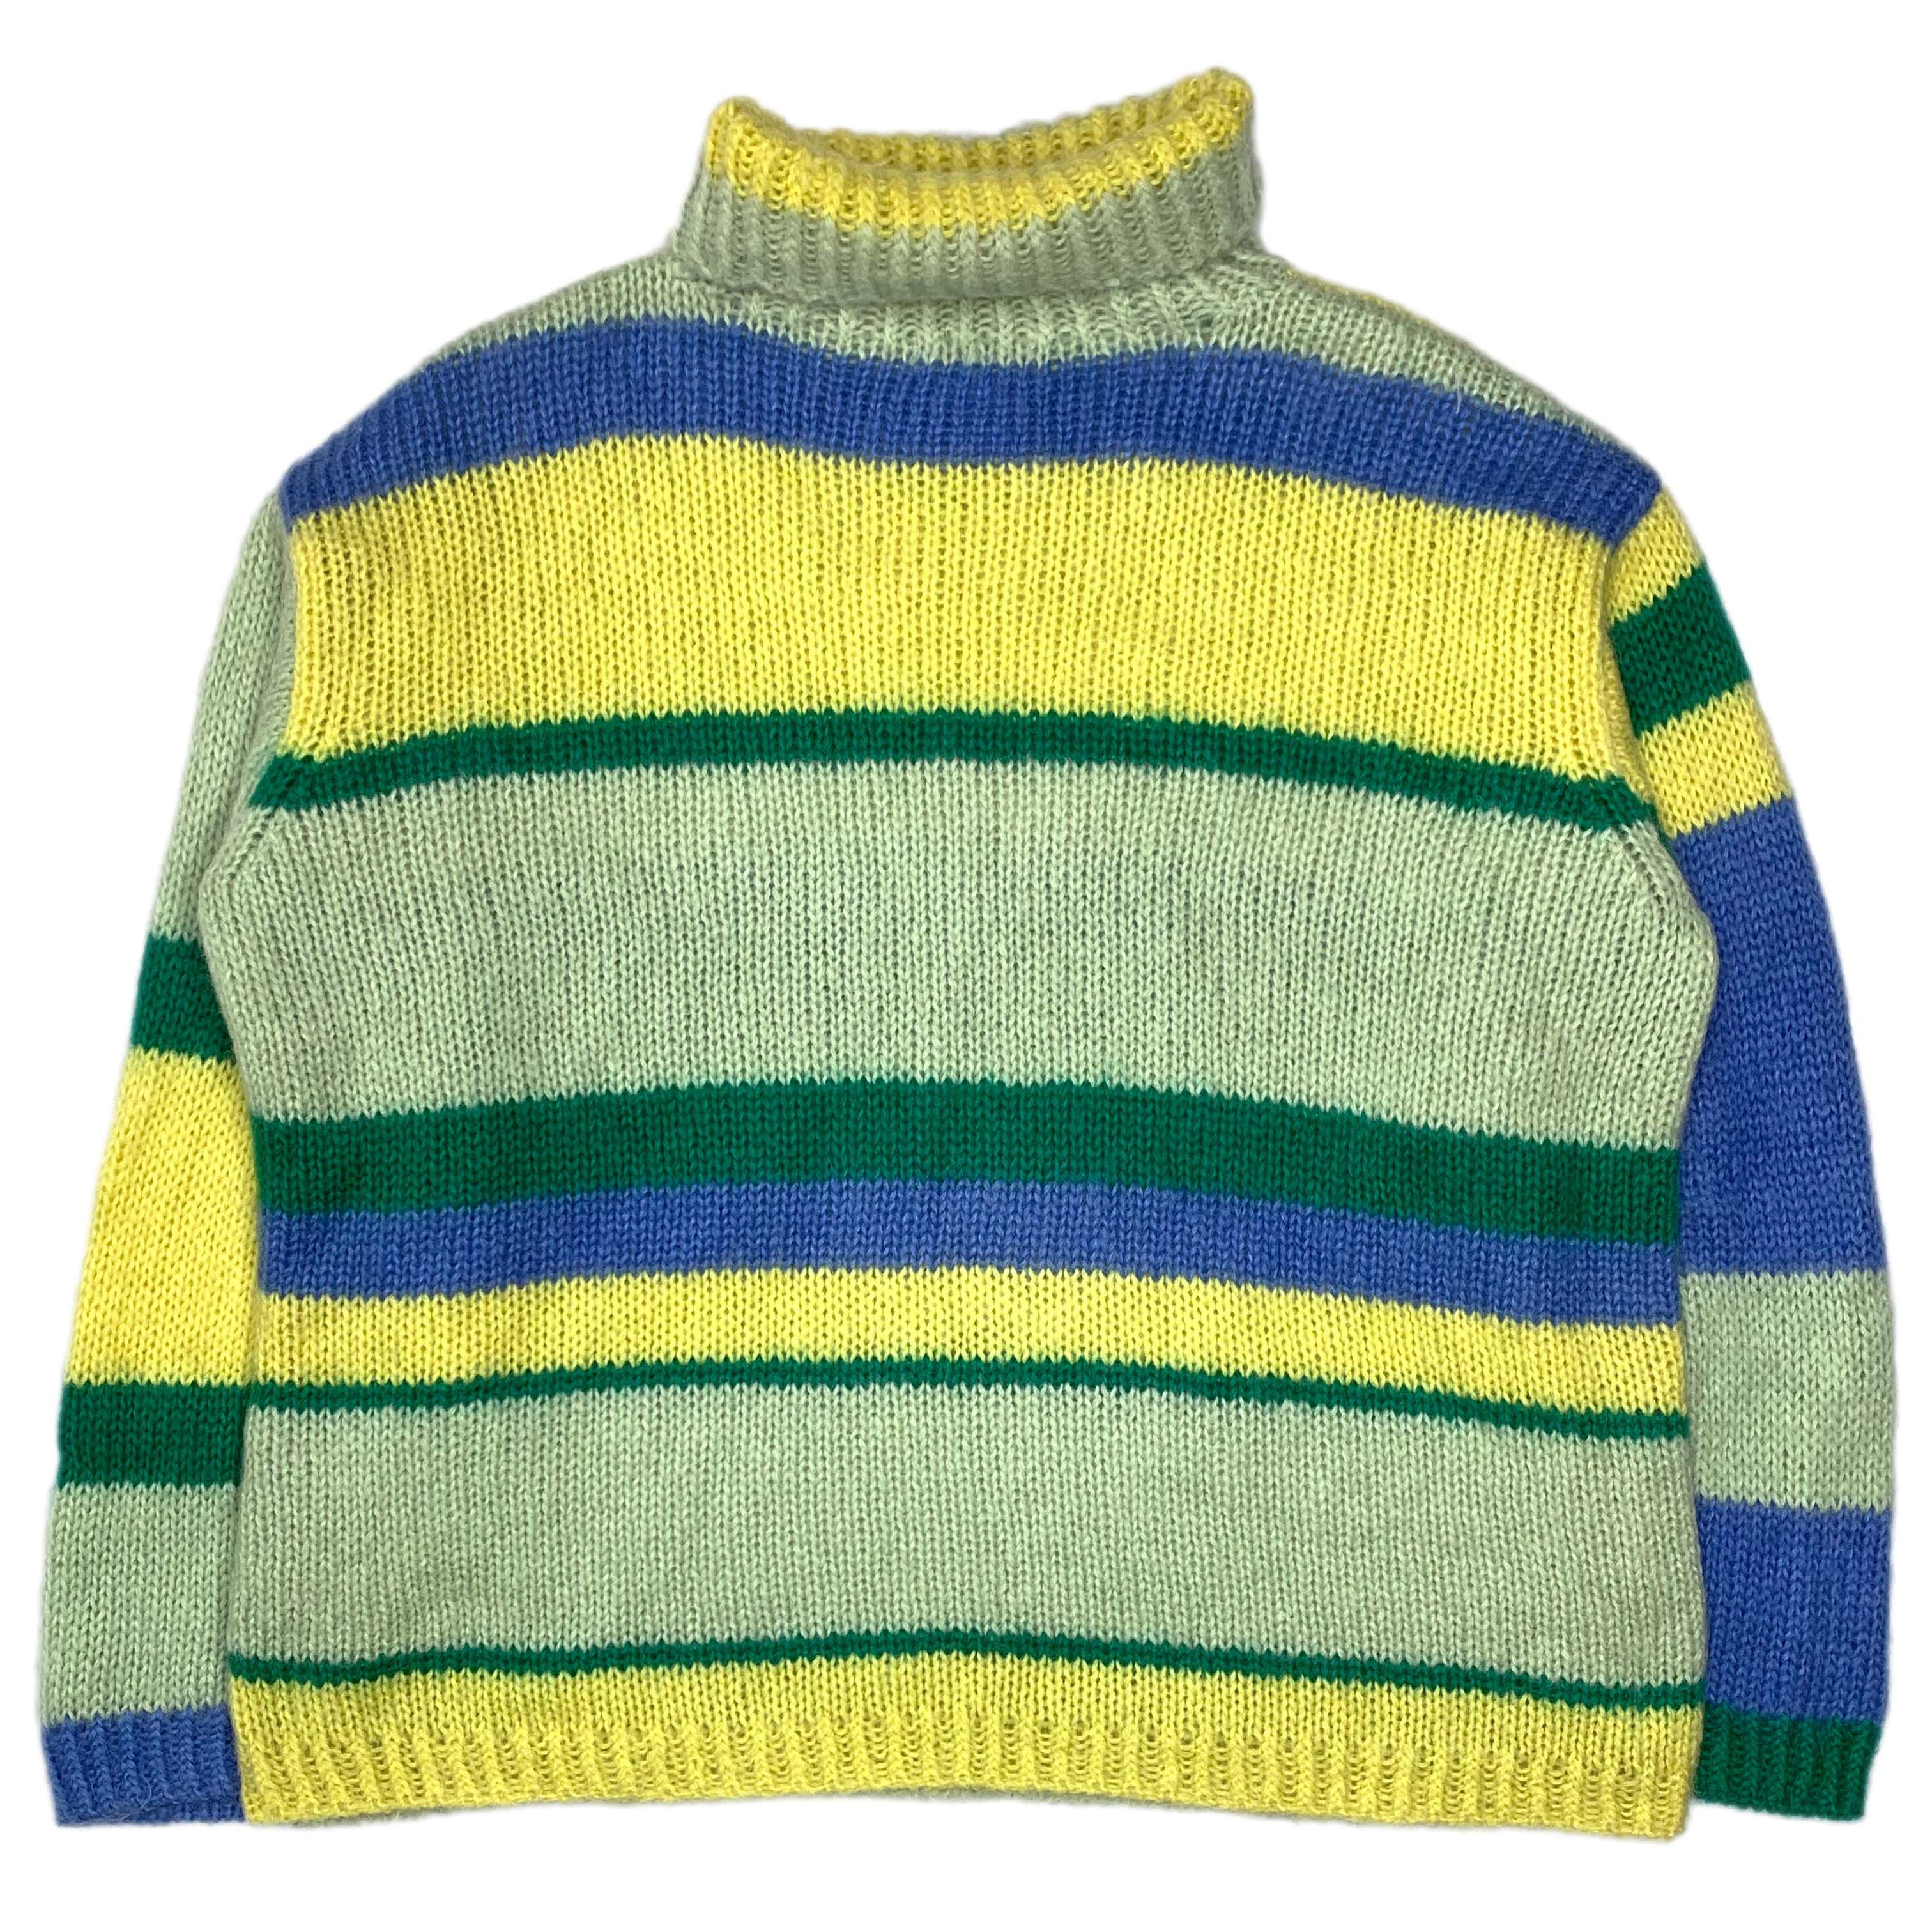 AW90 Colorful Oversized Striped Mohair Sweater - 2